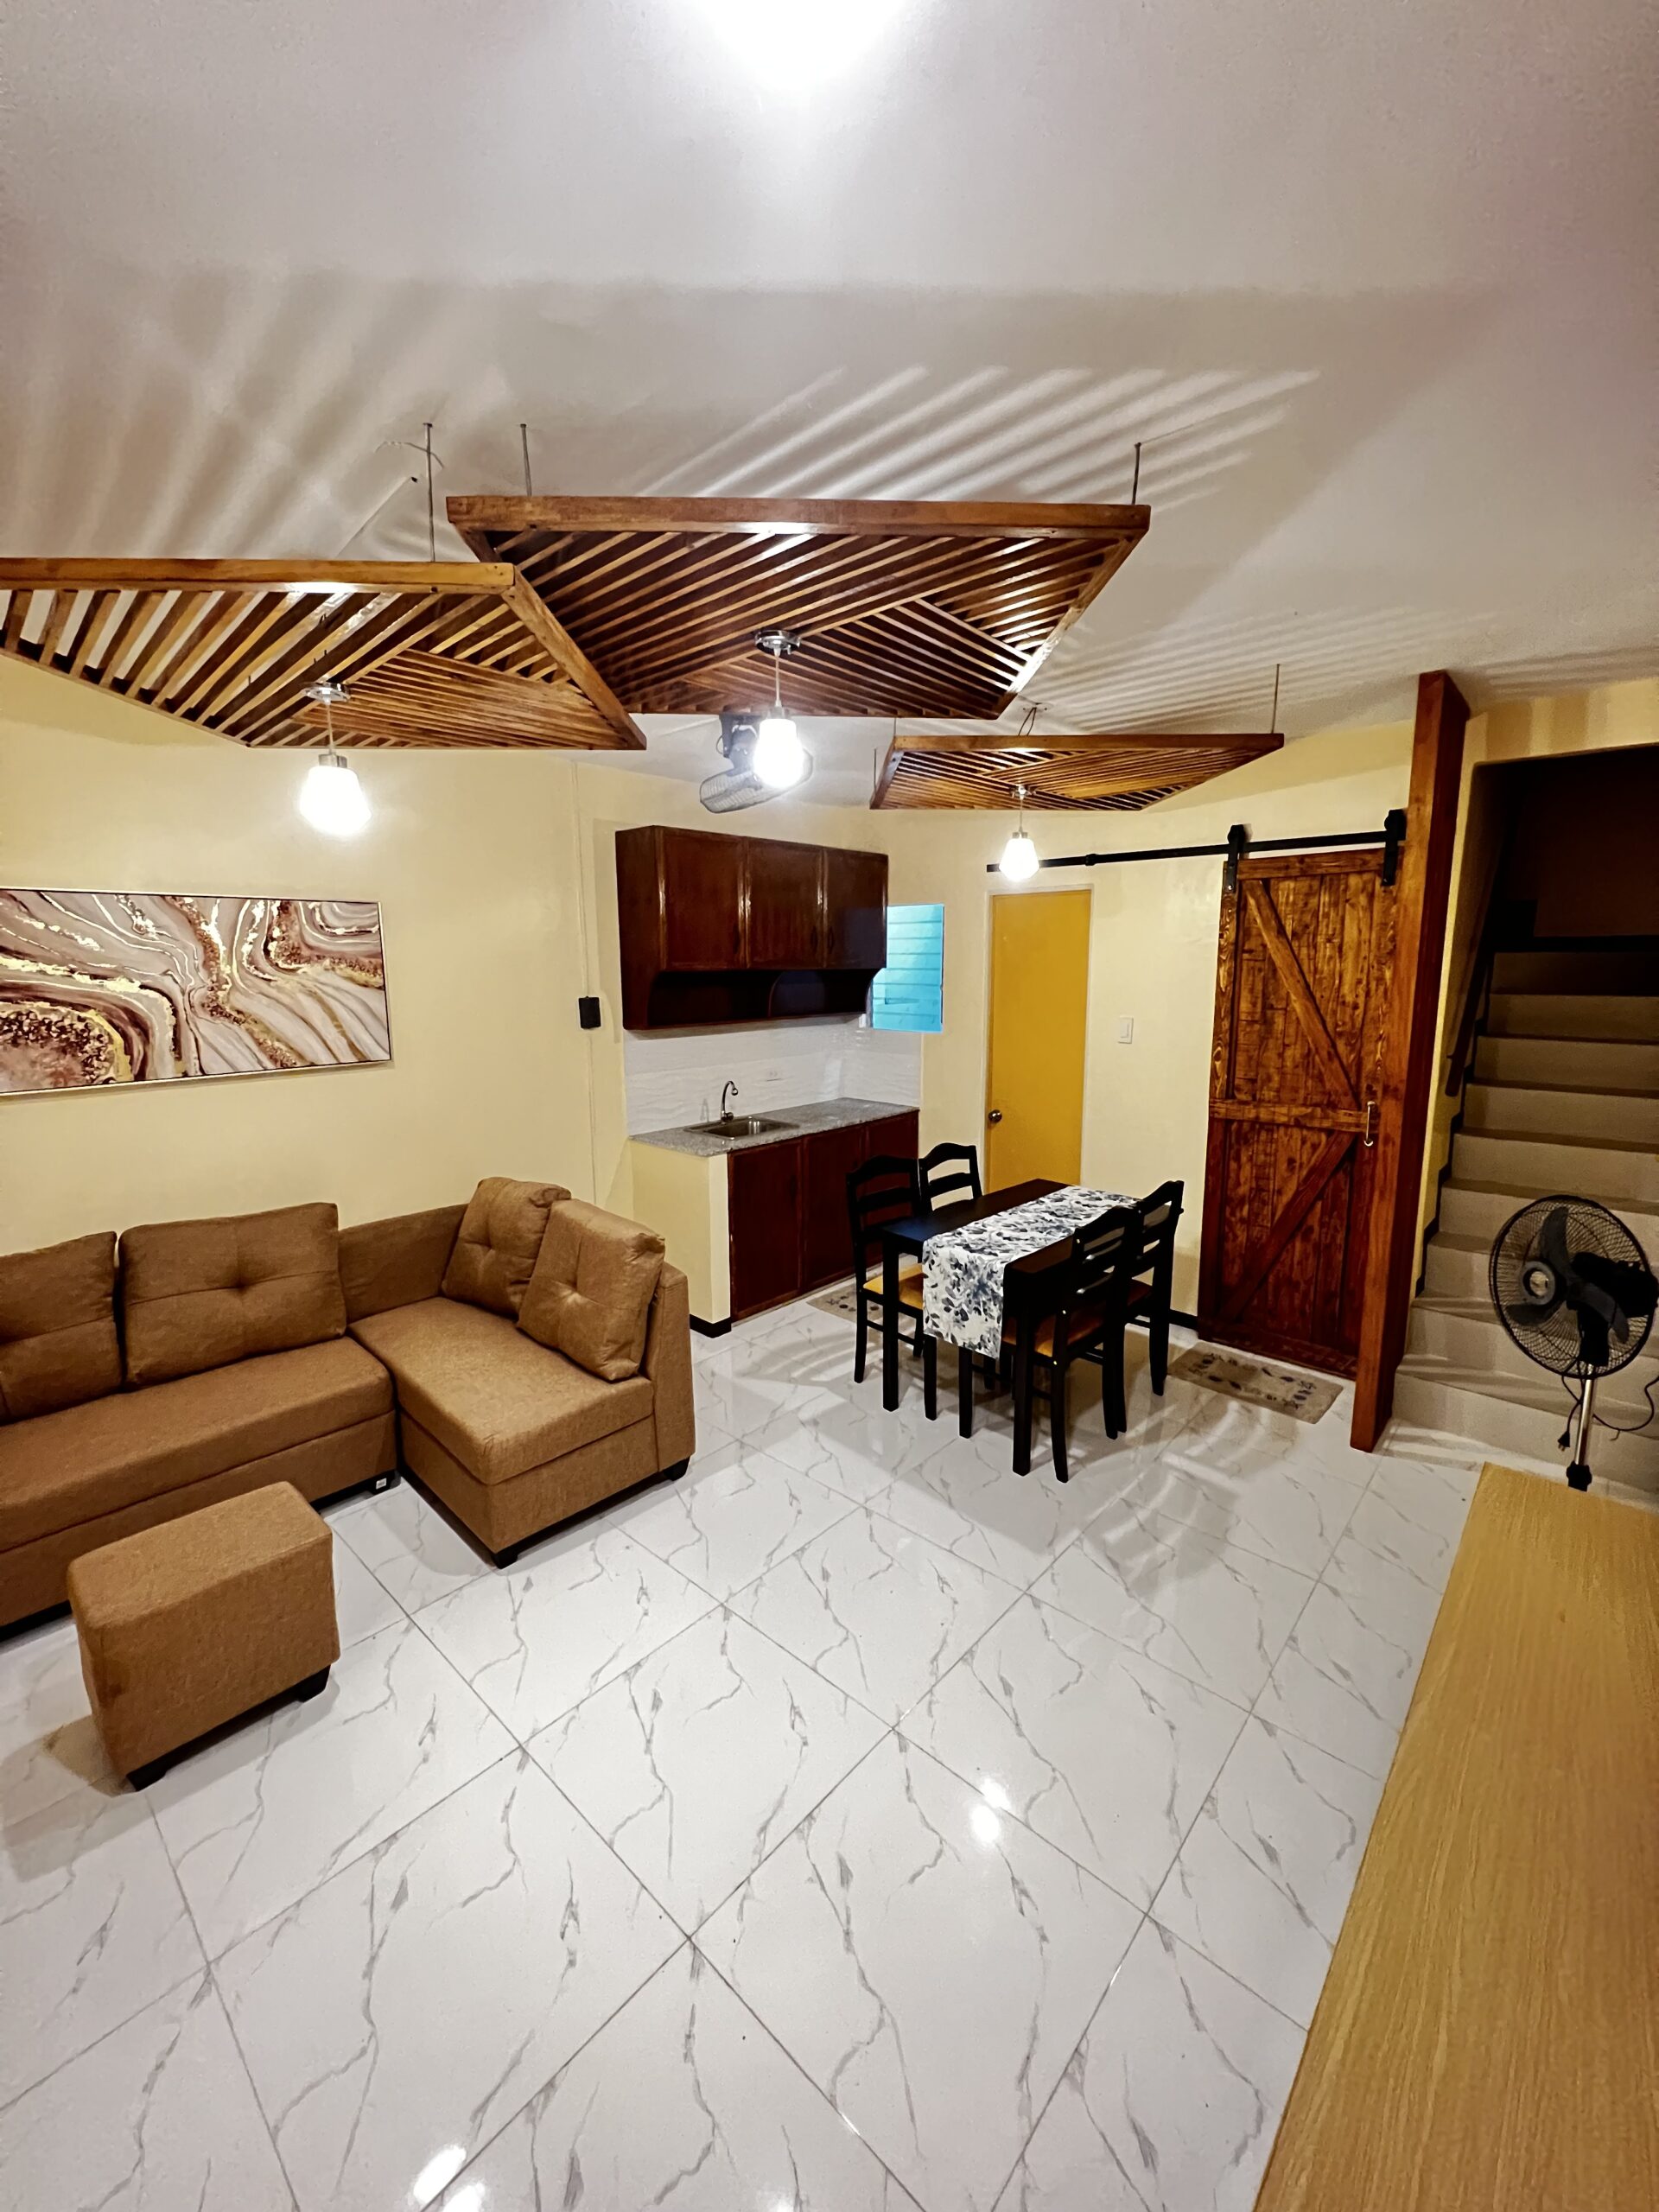 furnished house for sale in compostela, richwood homes compostela